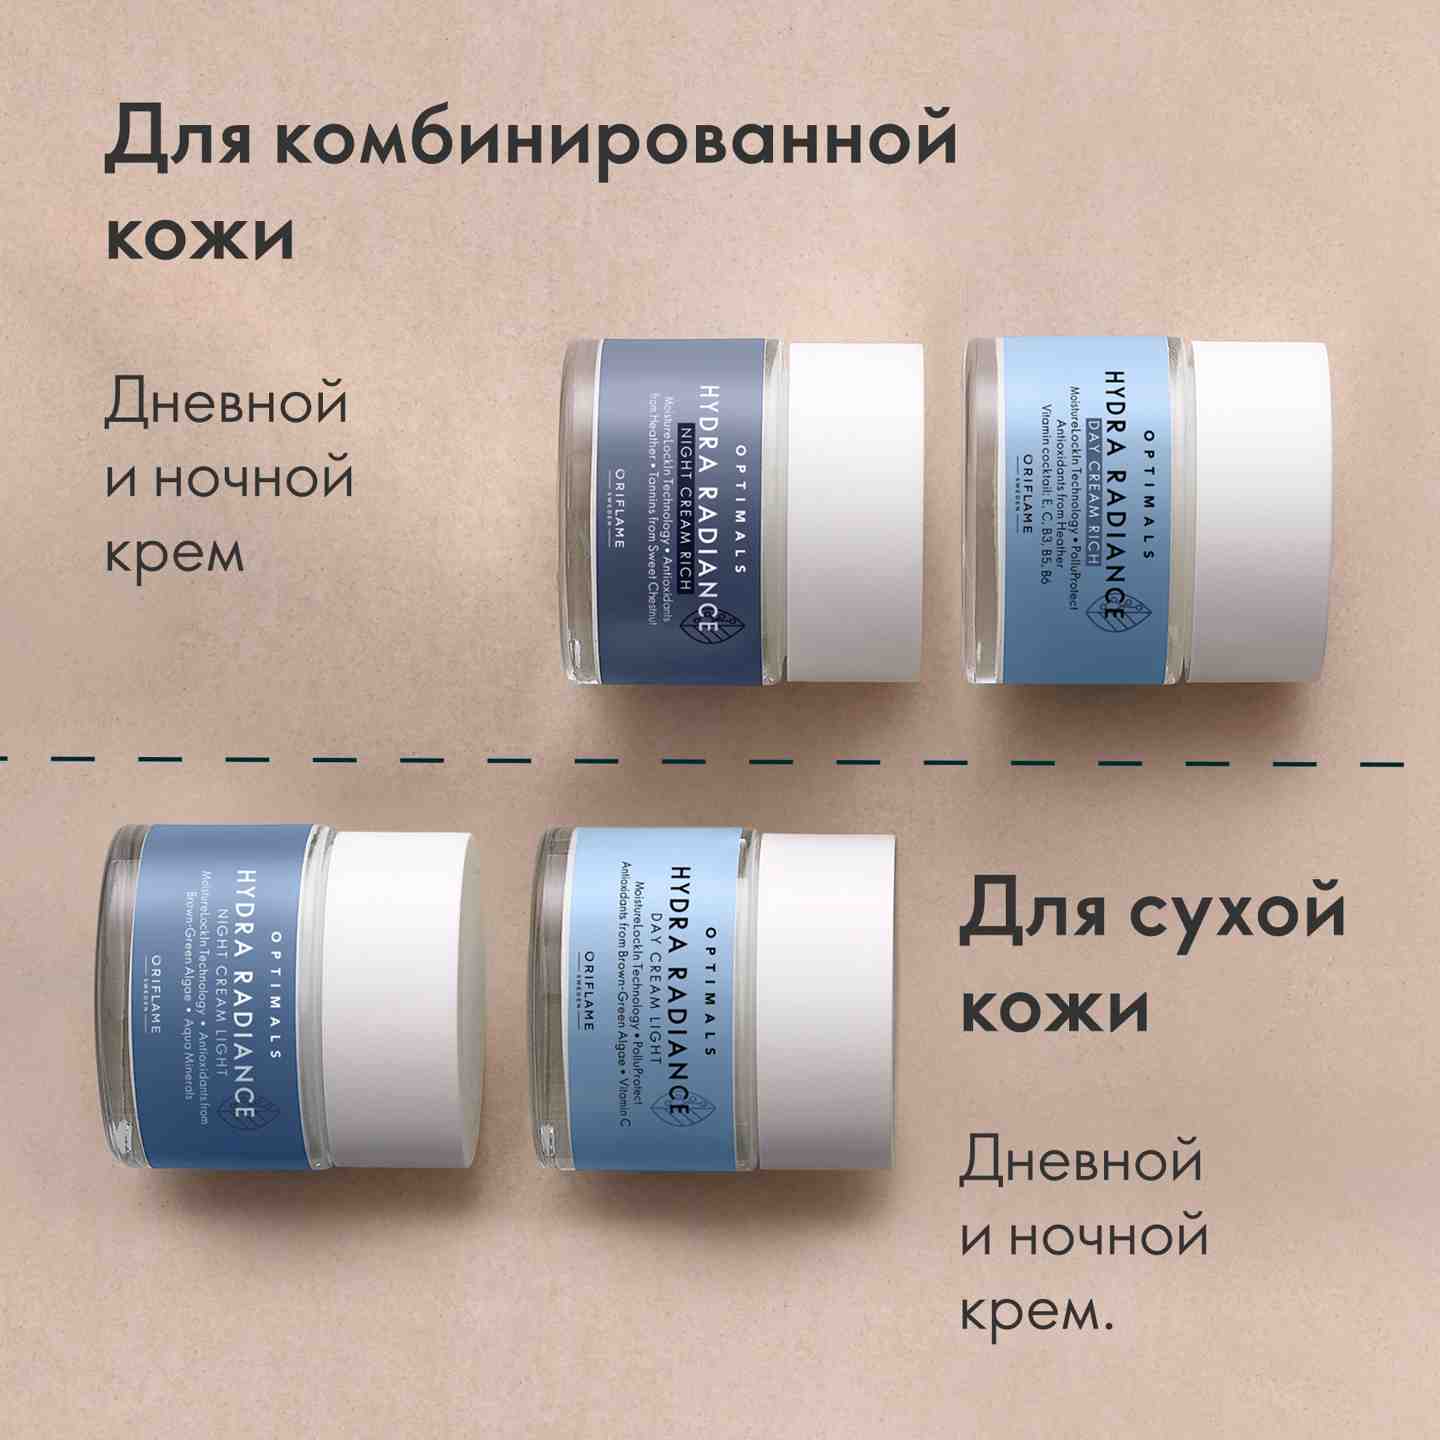 https://media-cdn.oriflame.com/productImage?externalMediaId=product-management-media%2fProducts%2f42580%2fGE%2f42580_4.png&id=15124652&version=1